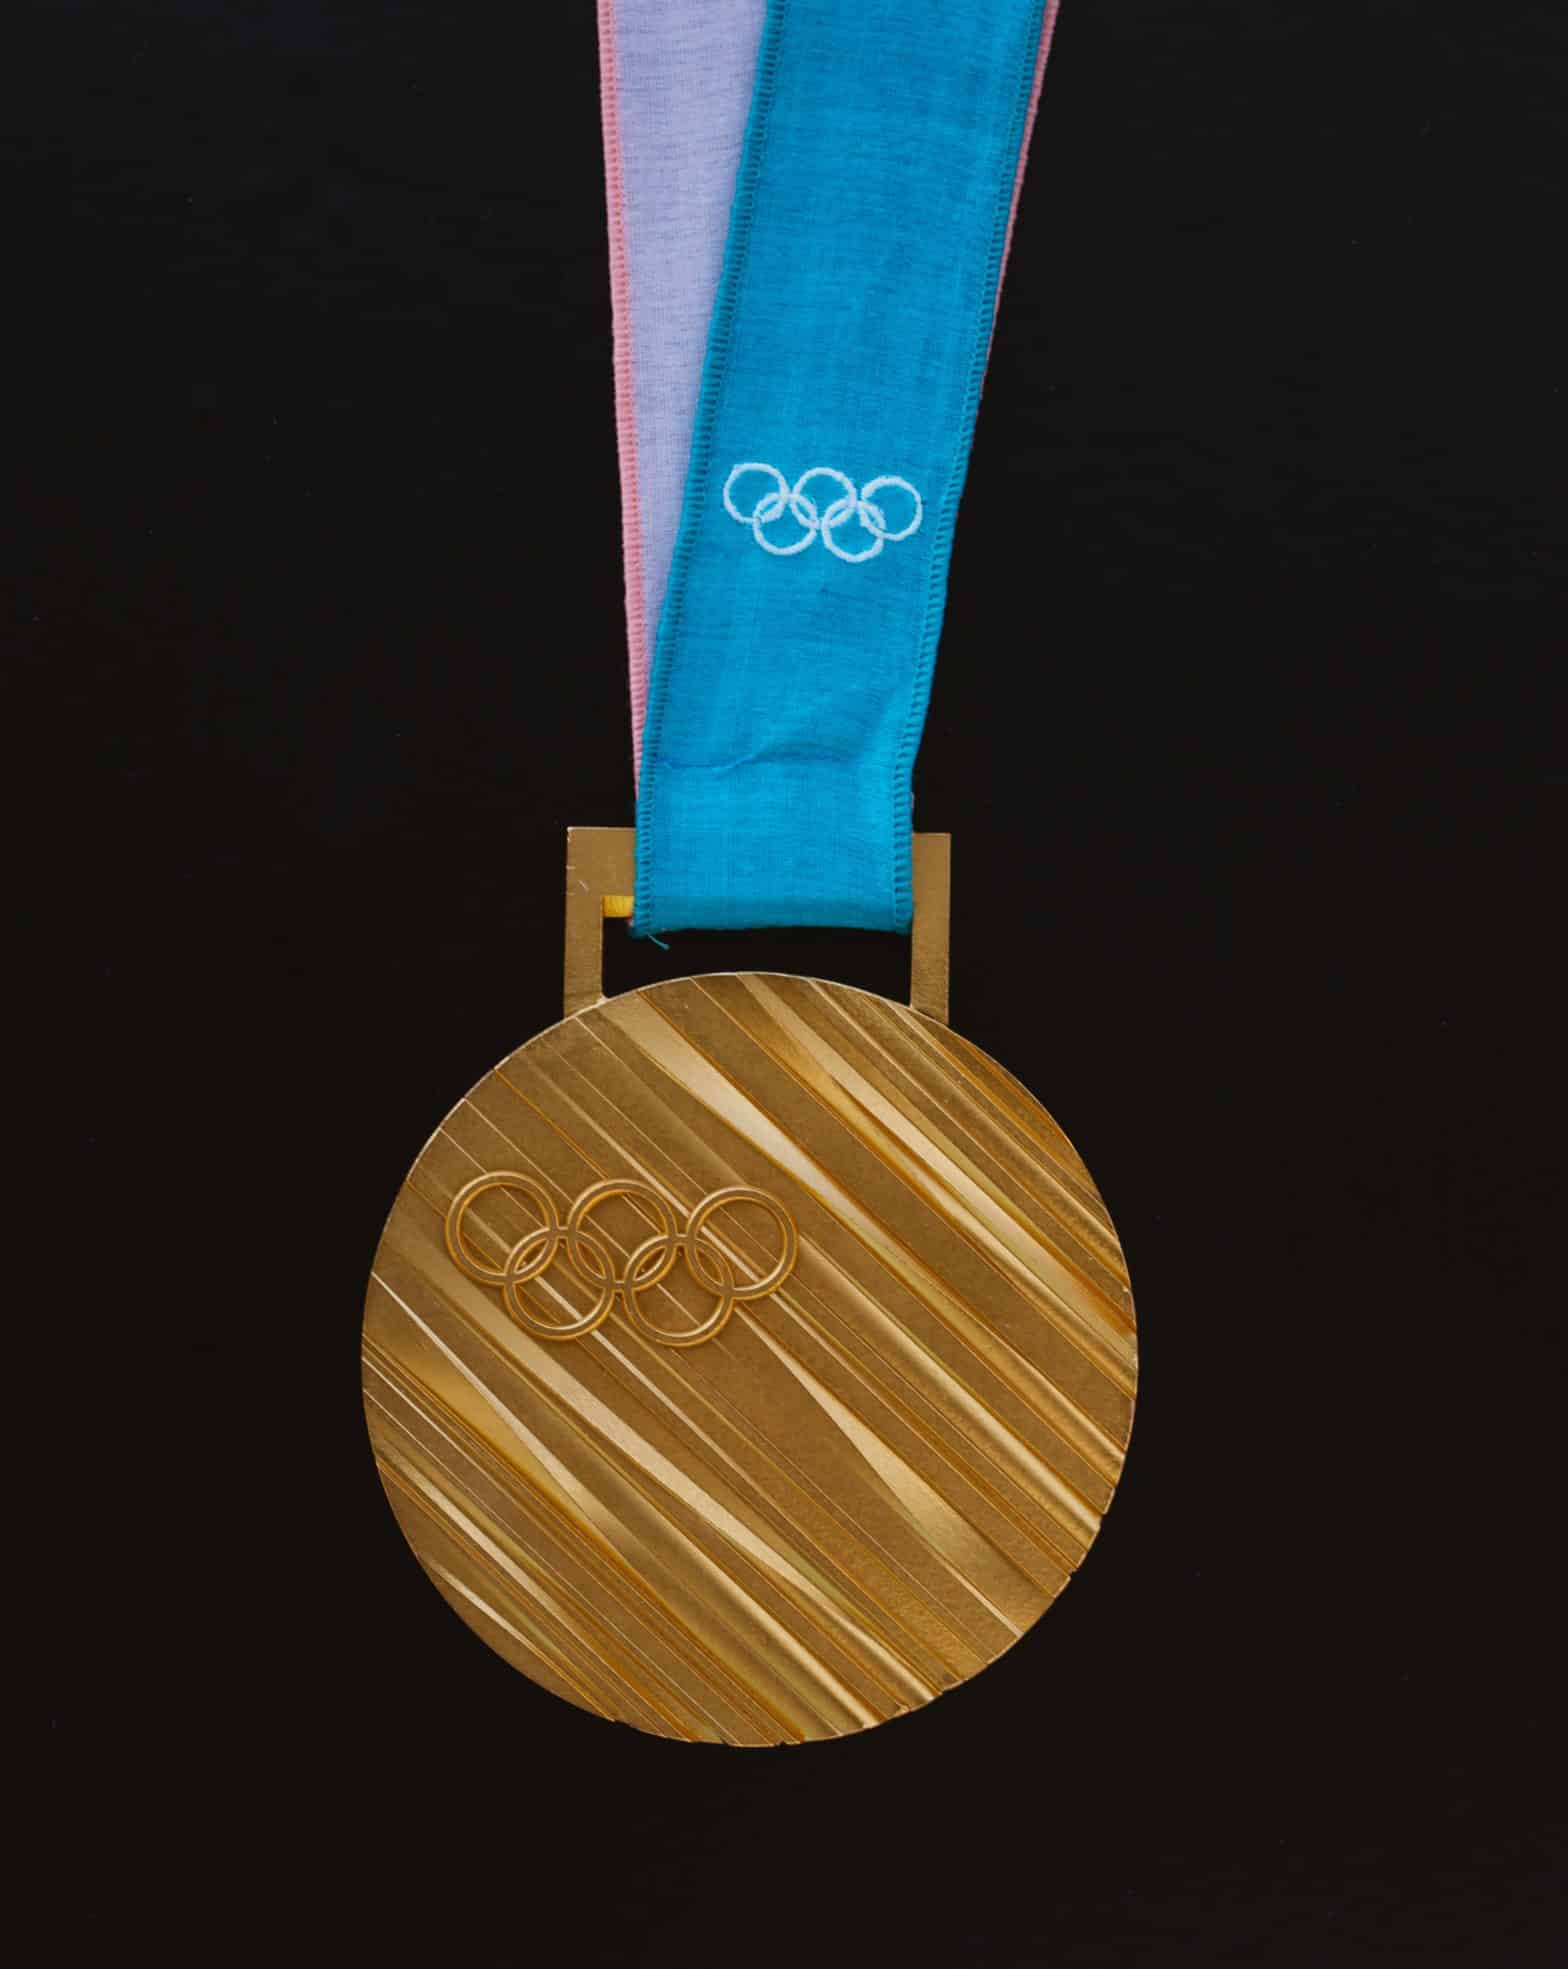 What does it take to win gold? By Joanne Z. Tan, 10PlusBrand.com - an Olympic Gold Medal symbolizing a champion brand